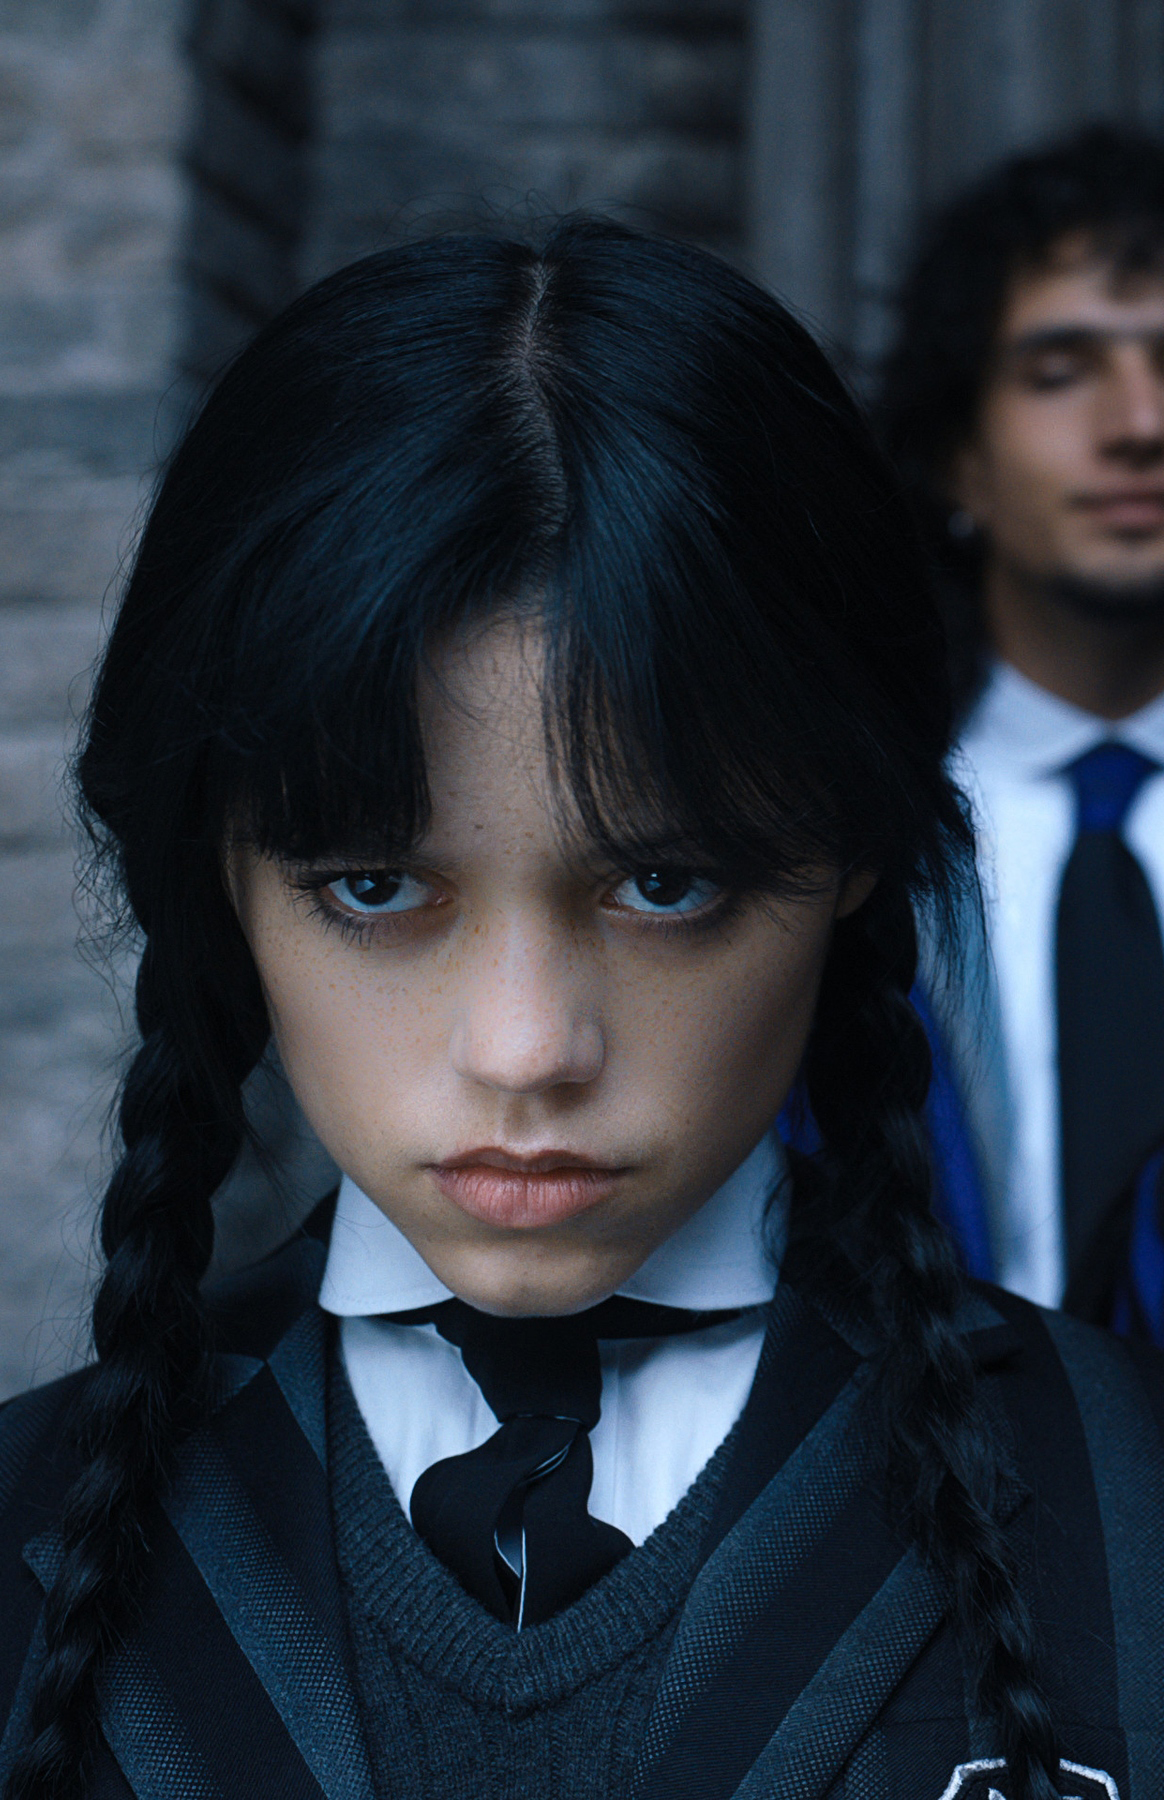 2022 Wednesday Addams Wallpapers - Wallpaper Cave